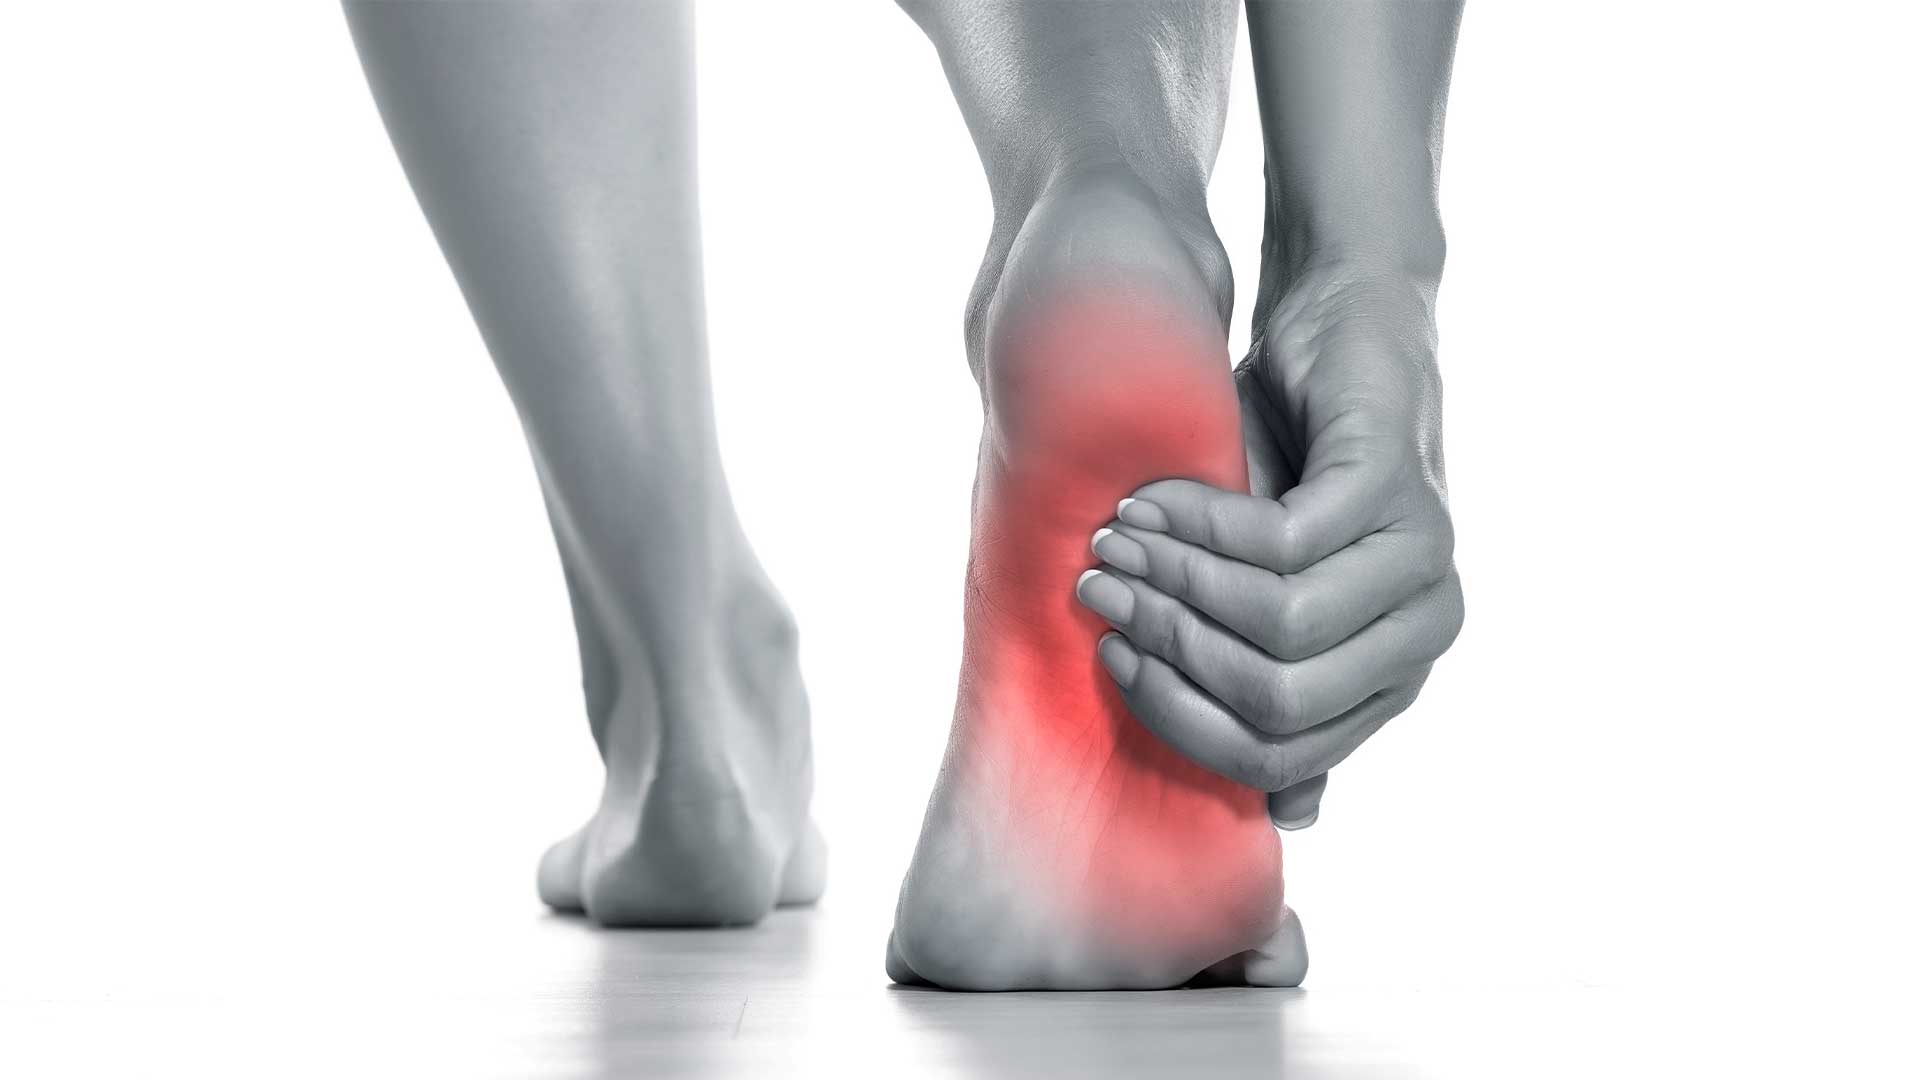 Pain In The Back Of The Heel: What Could It Mean?